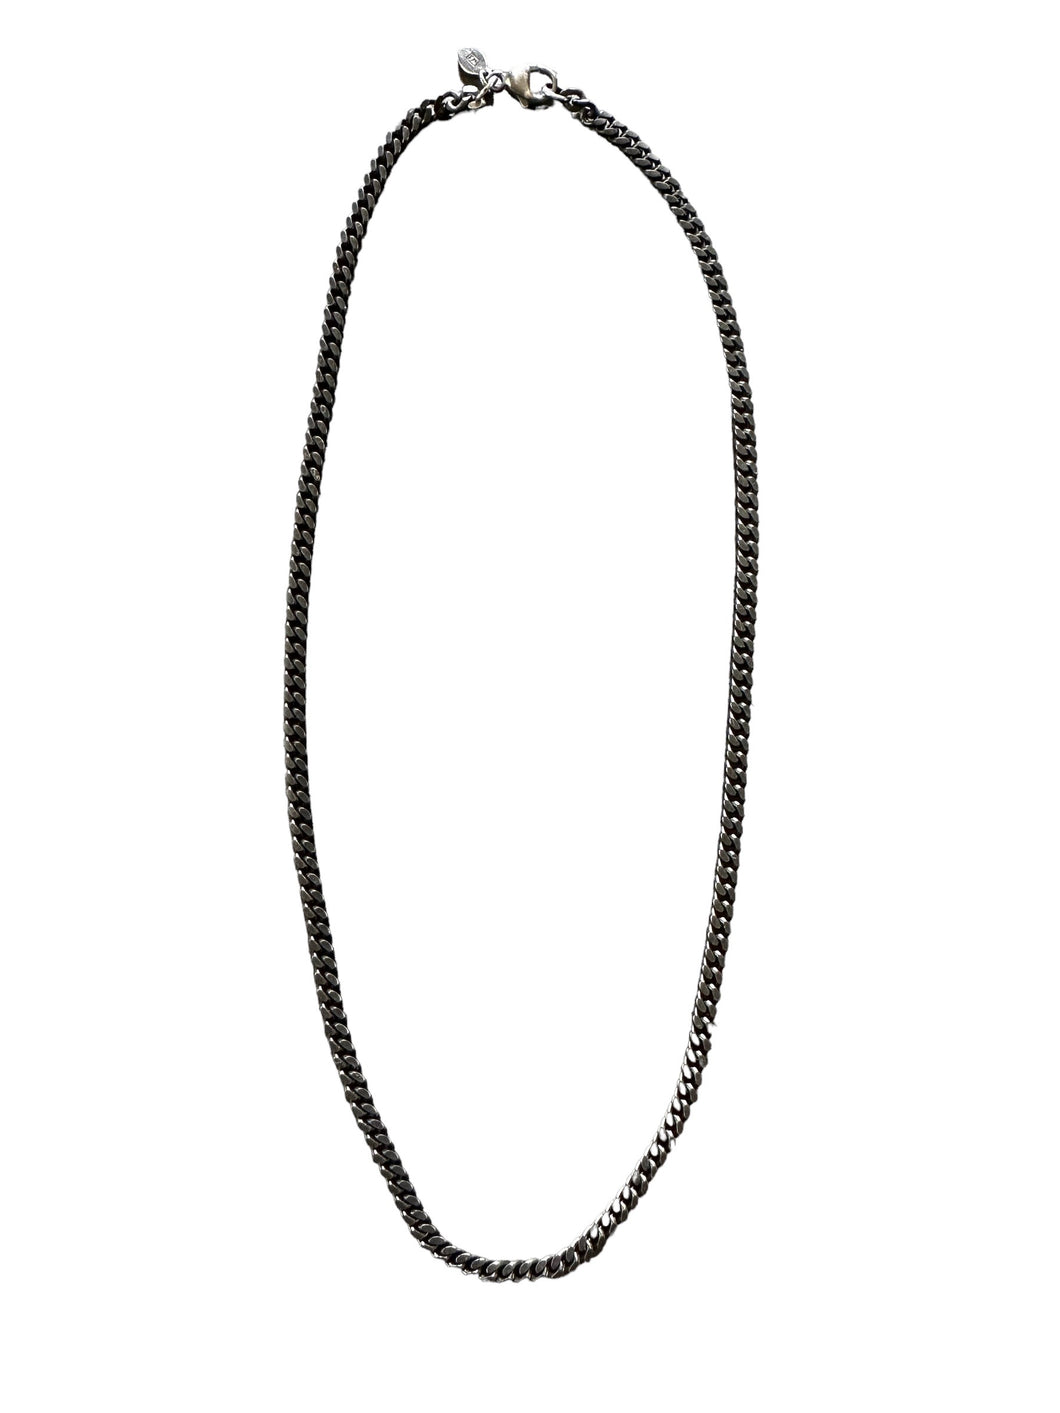 TALL DARK AND HANDSOME CURB NECKLACE